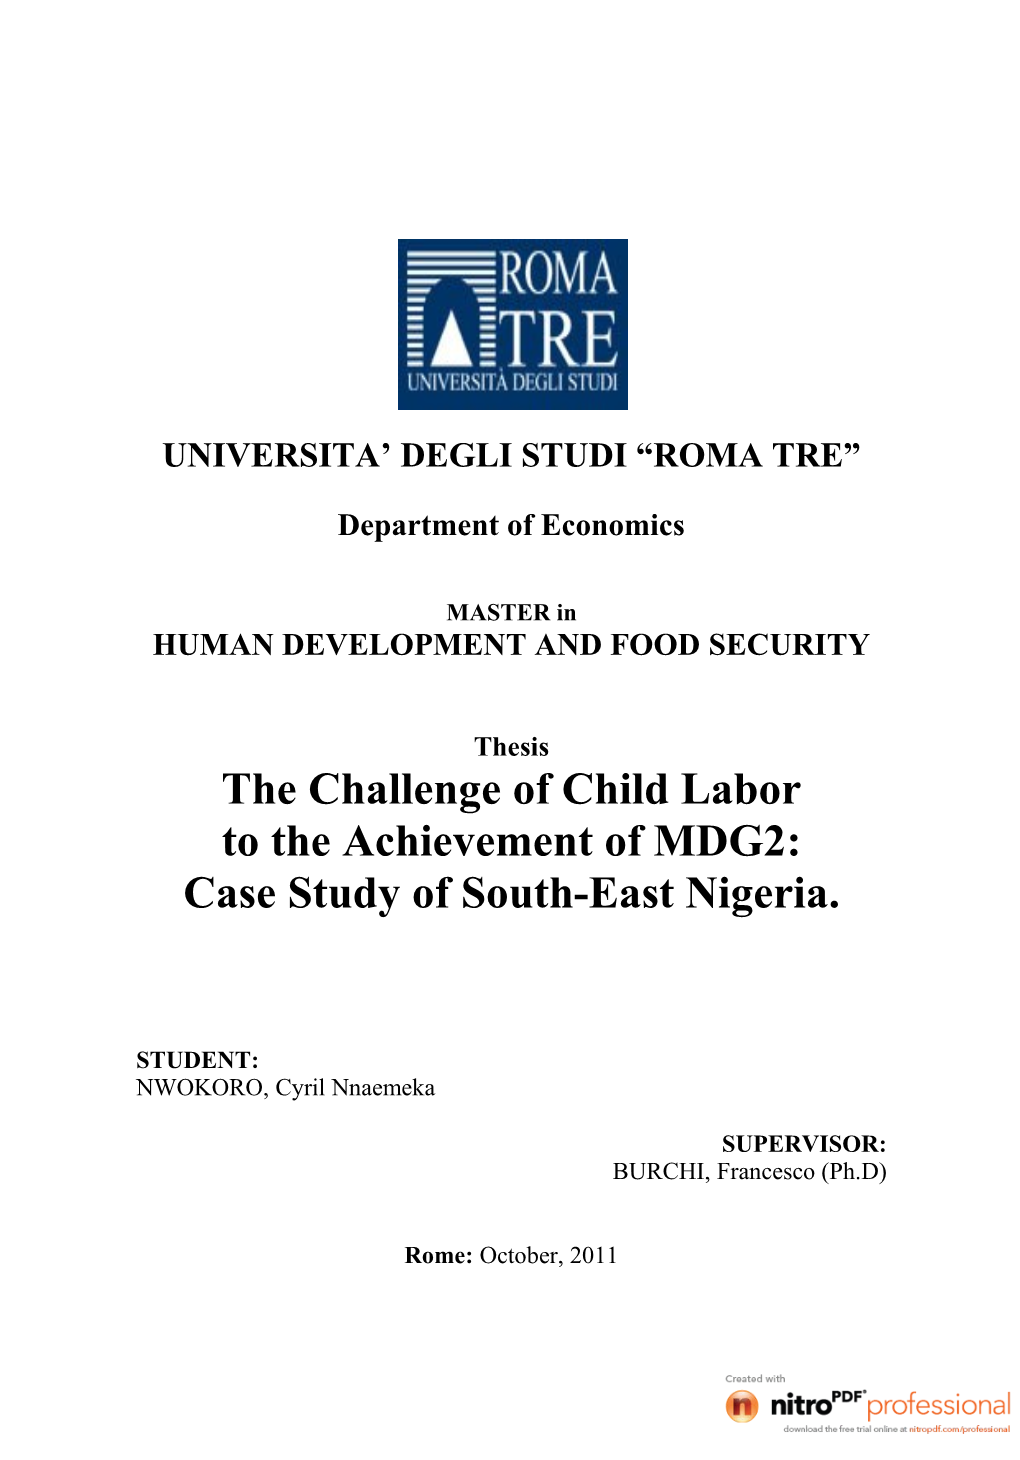 The Challenge of Child Labor to the Achievement of MDG2: Case Study of South-East Nigeria